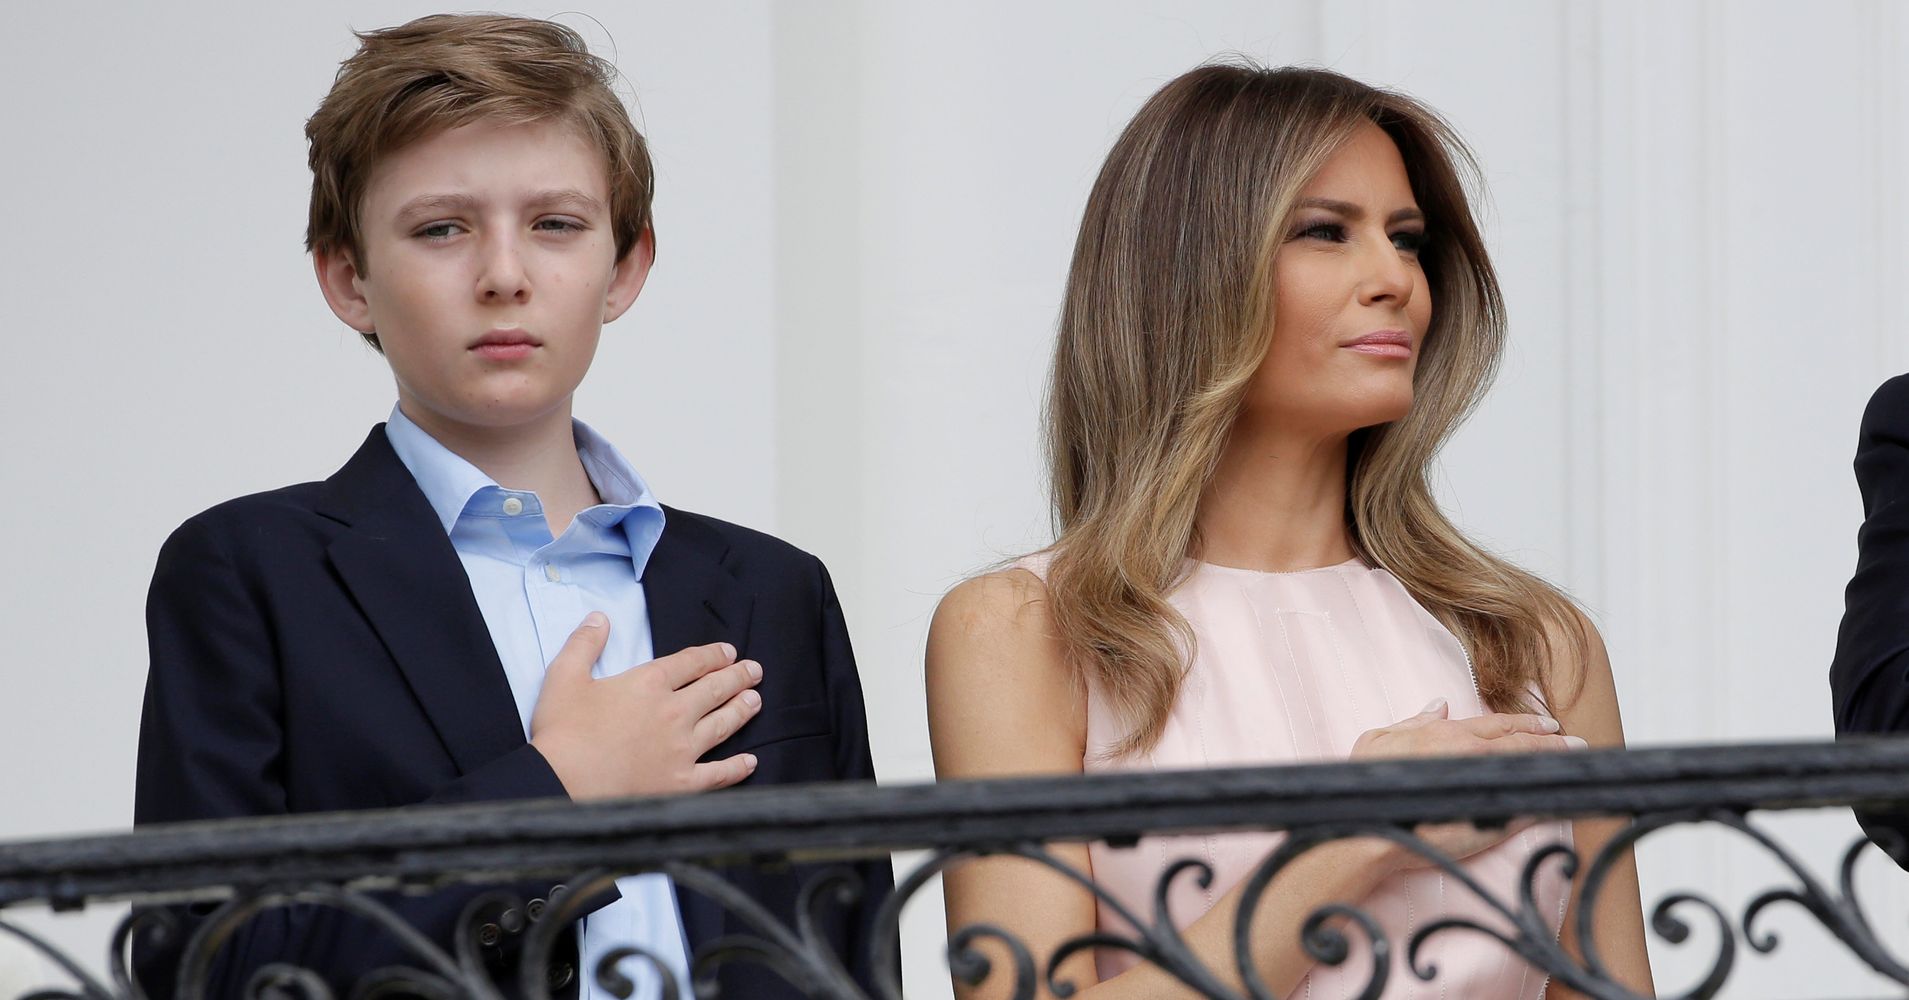 Melania Trump Wore Pink To The Easter Egg Roll, But Look At This Tweet ...